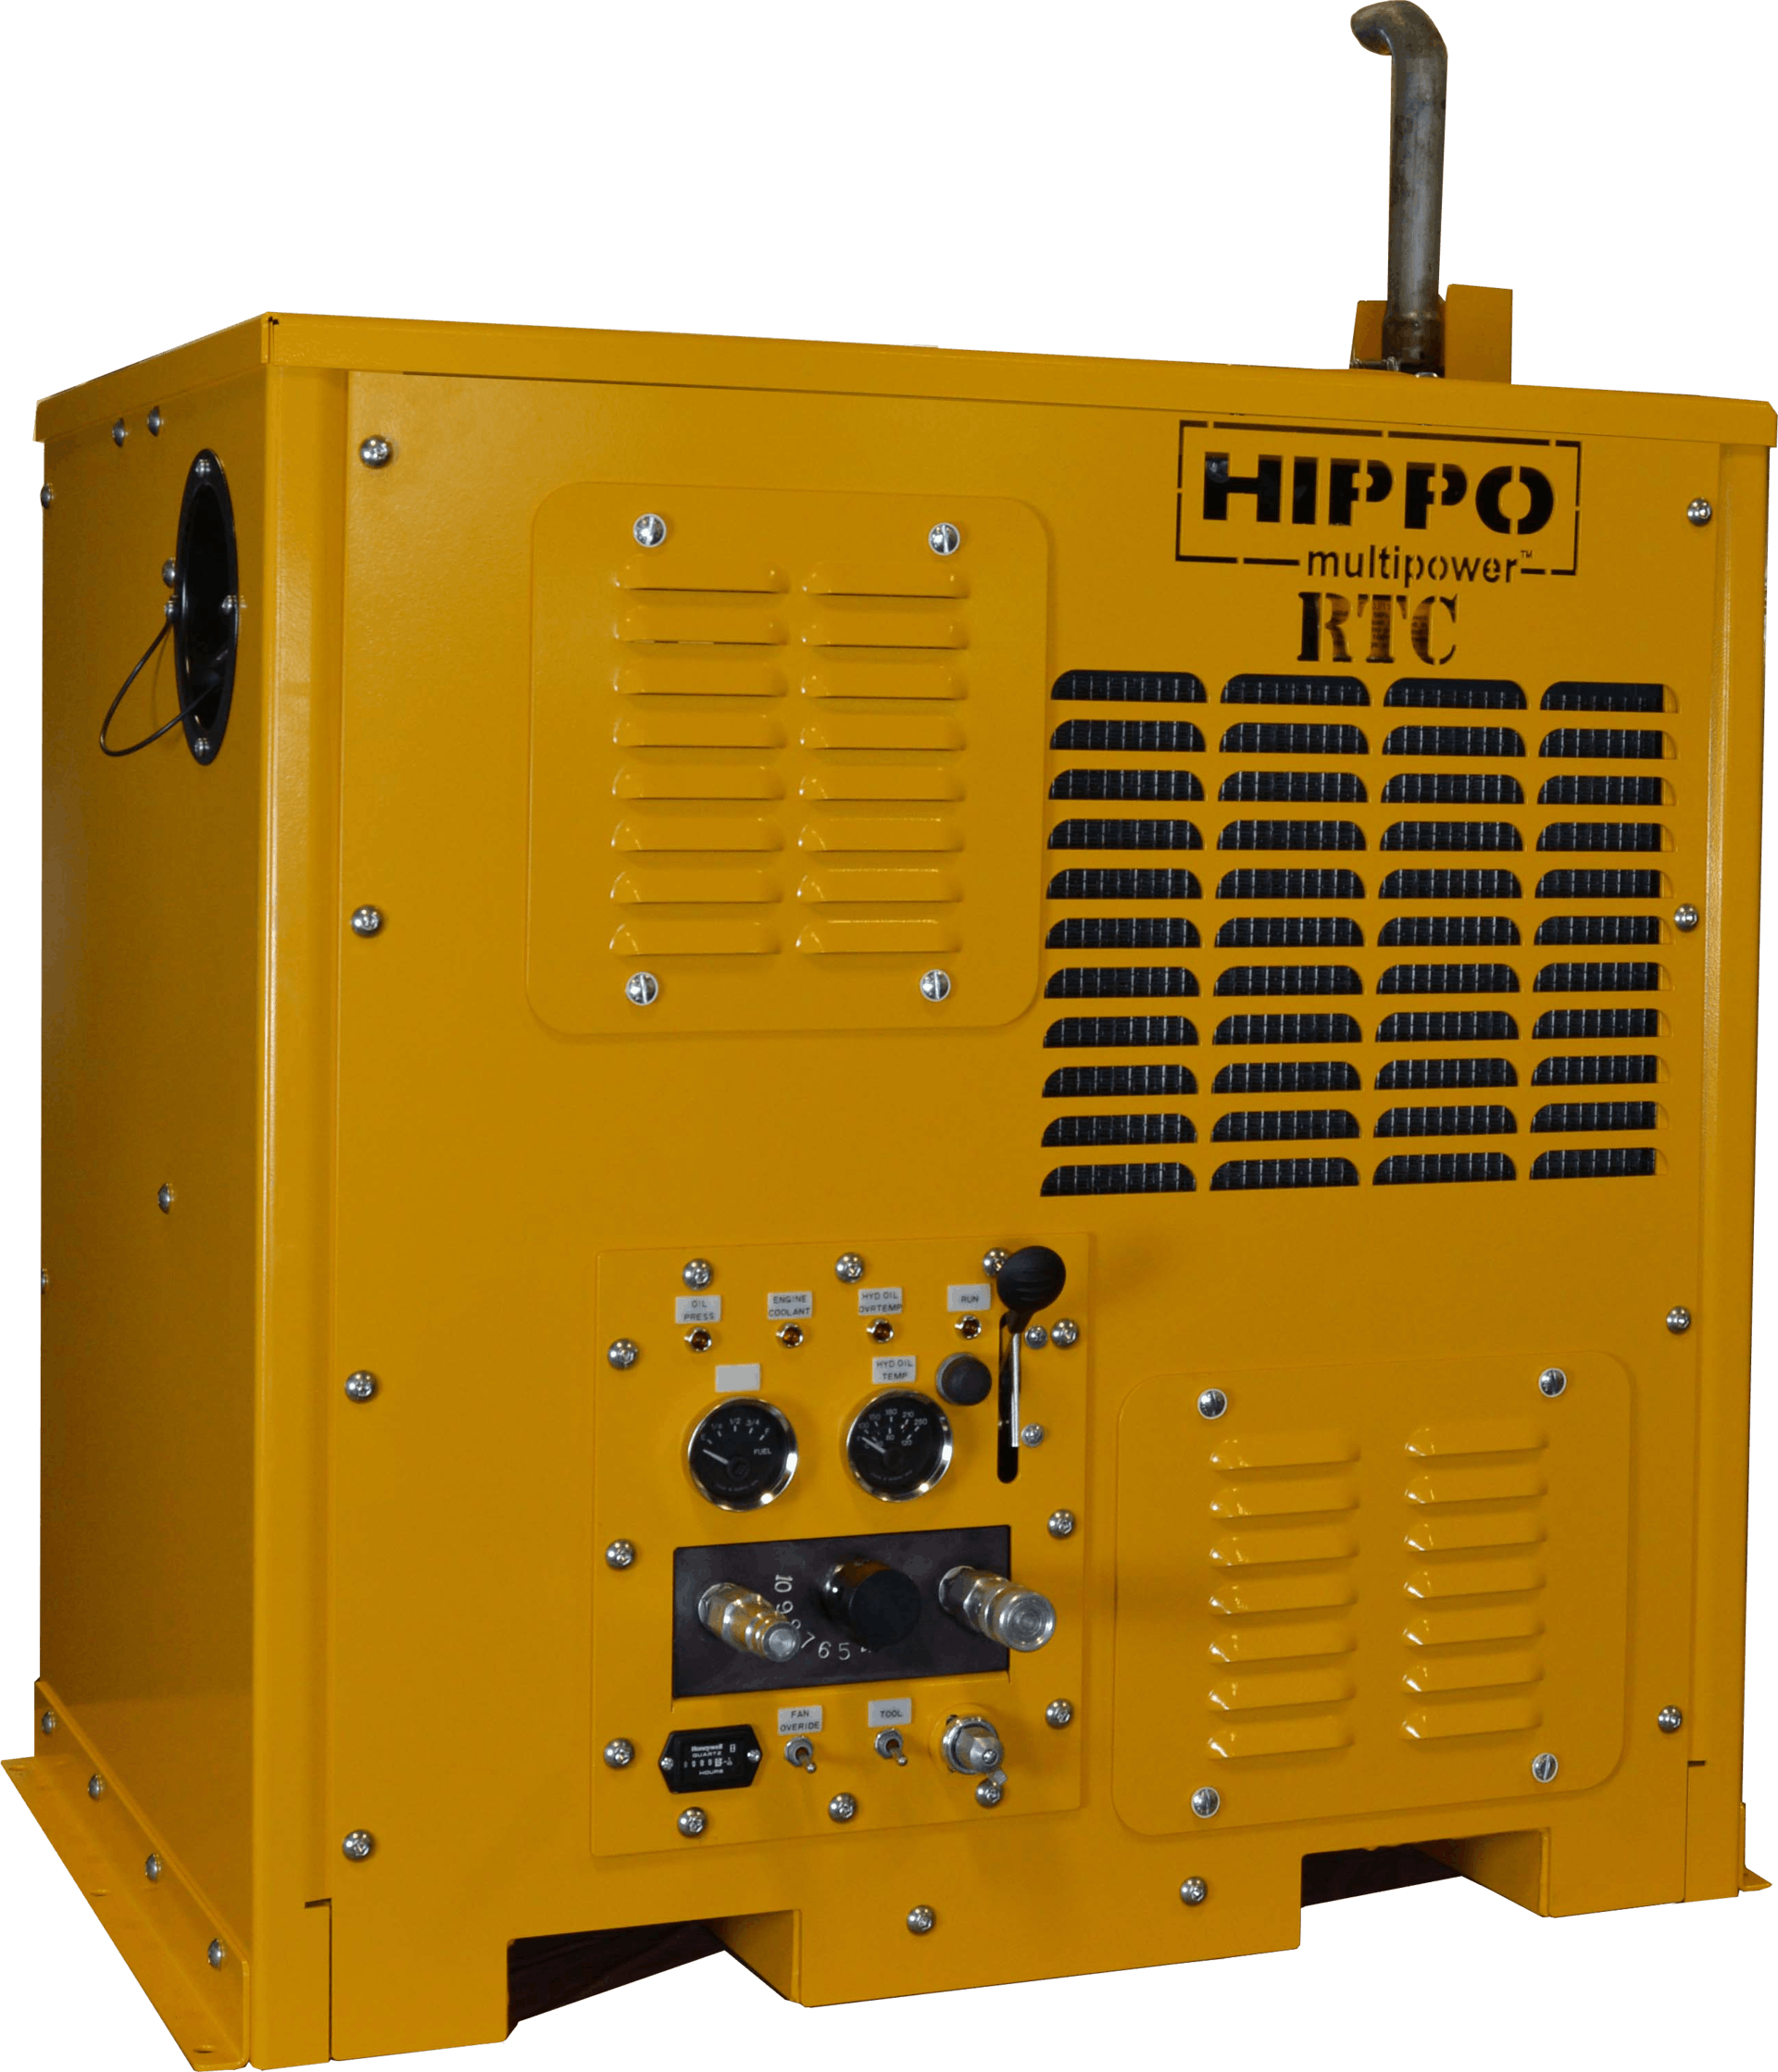 HIPPO Multipower - HIPPO CPS (Complete Power Solution)